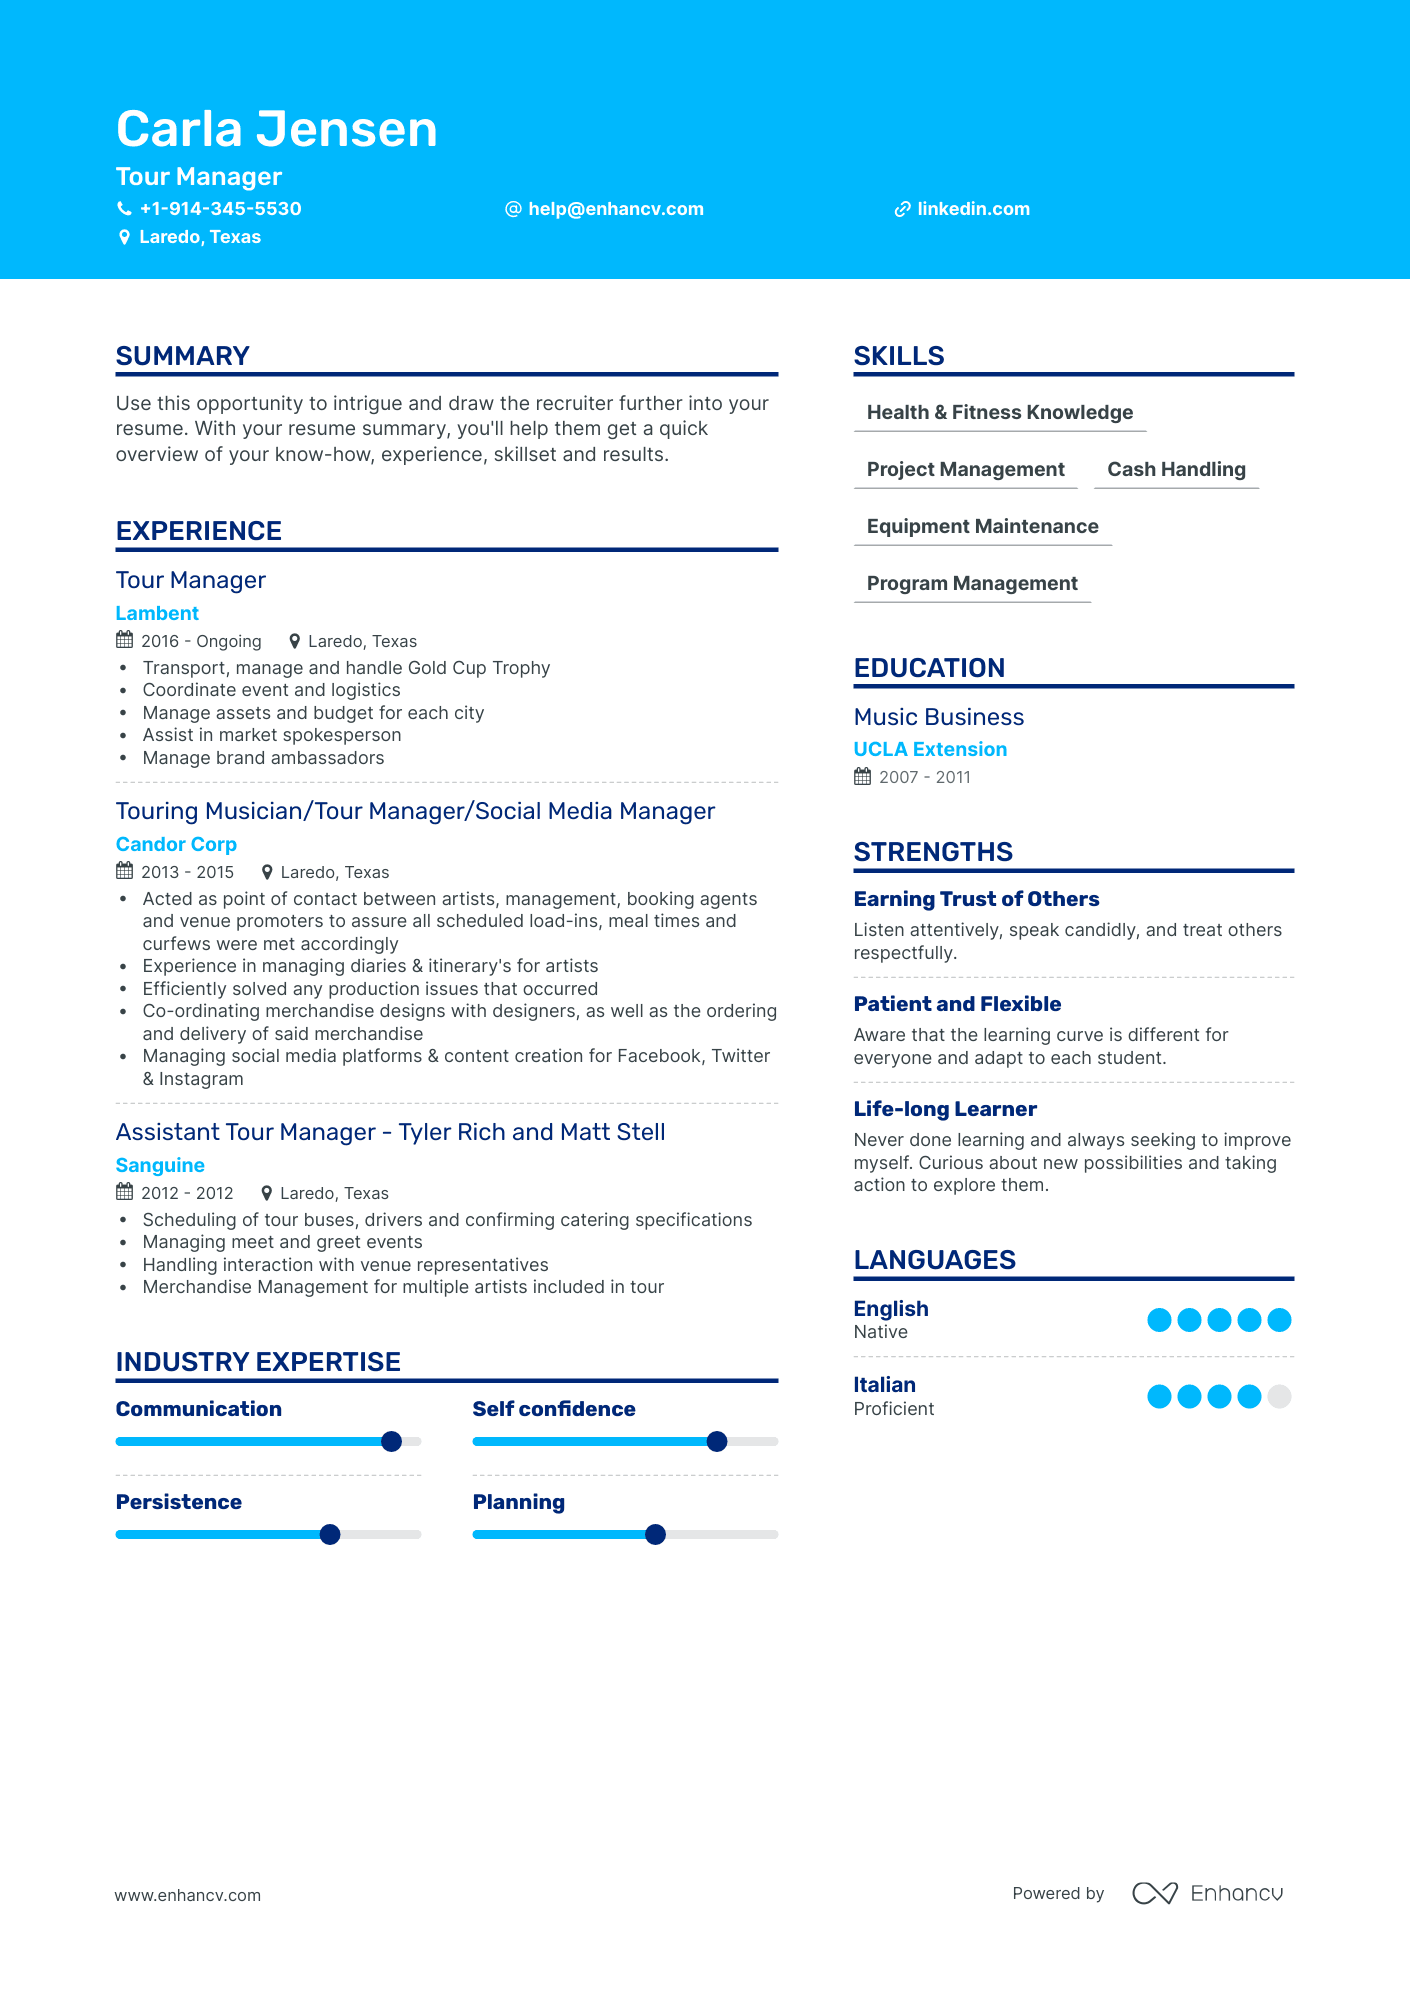 Tour Manager Resume Examples & Guide for 2023 (Layout, Skills, Keywords ...